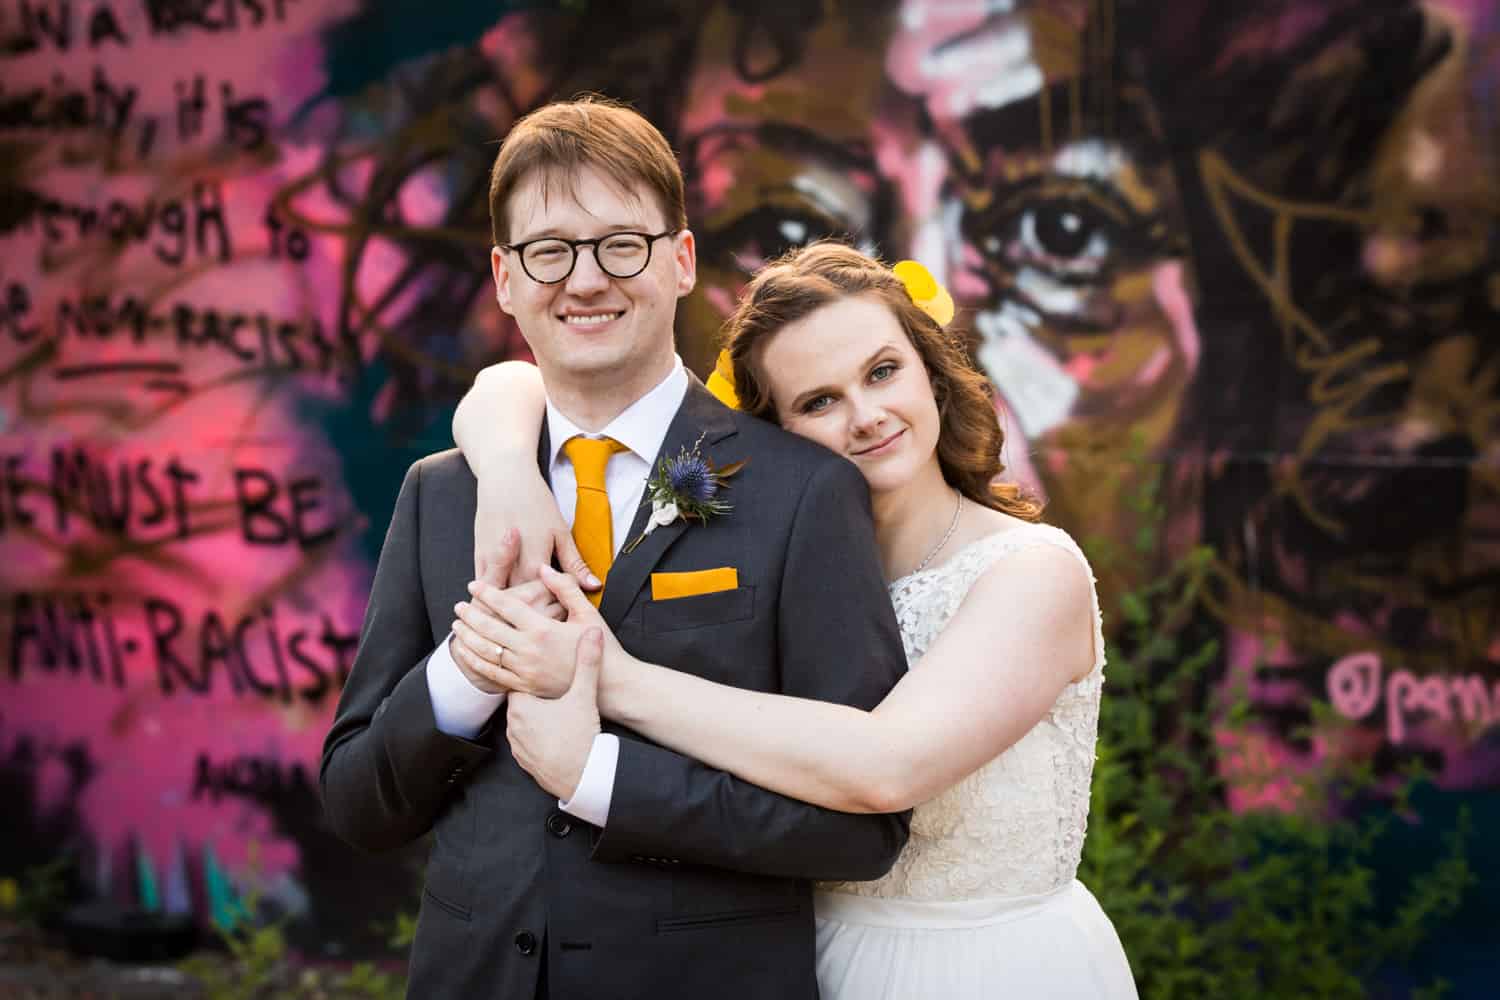 Bride hugging groom in front of graffiti for an article on Covid-19 wedding planning